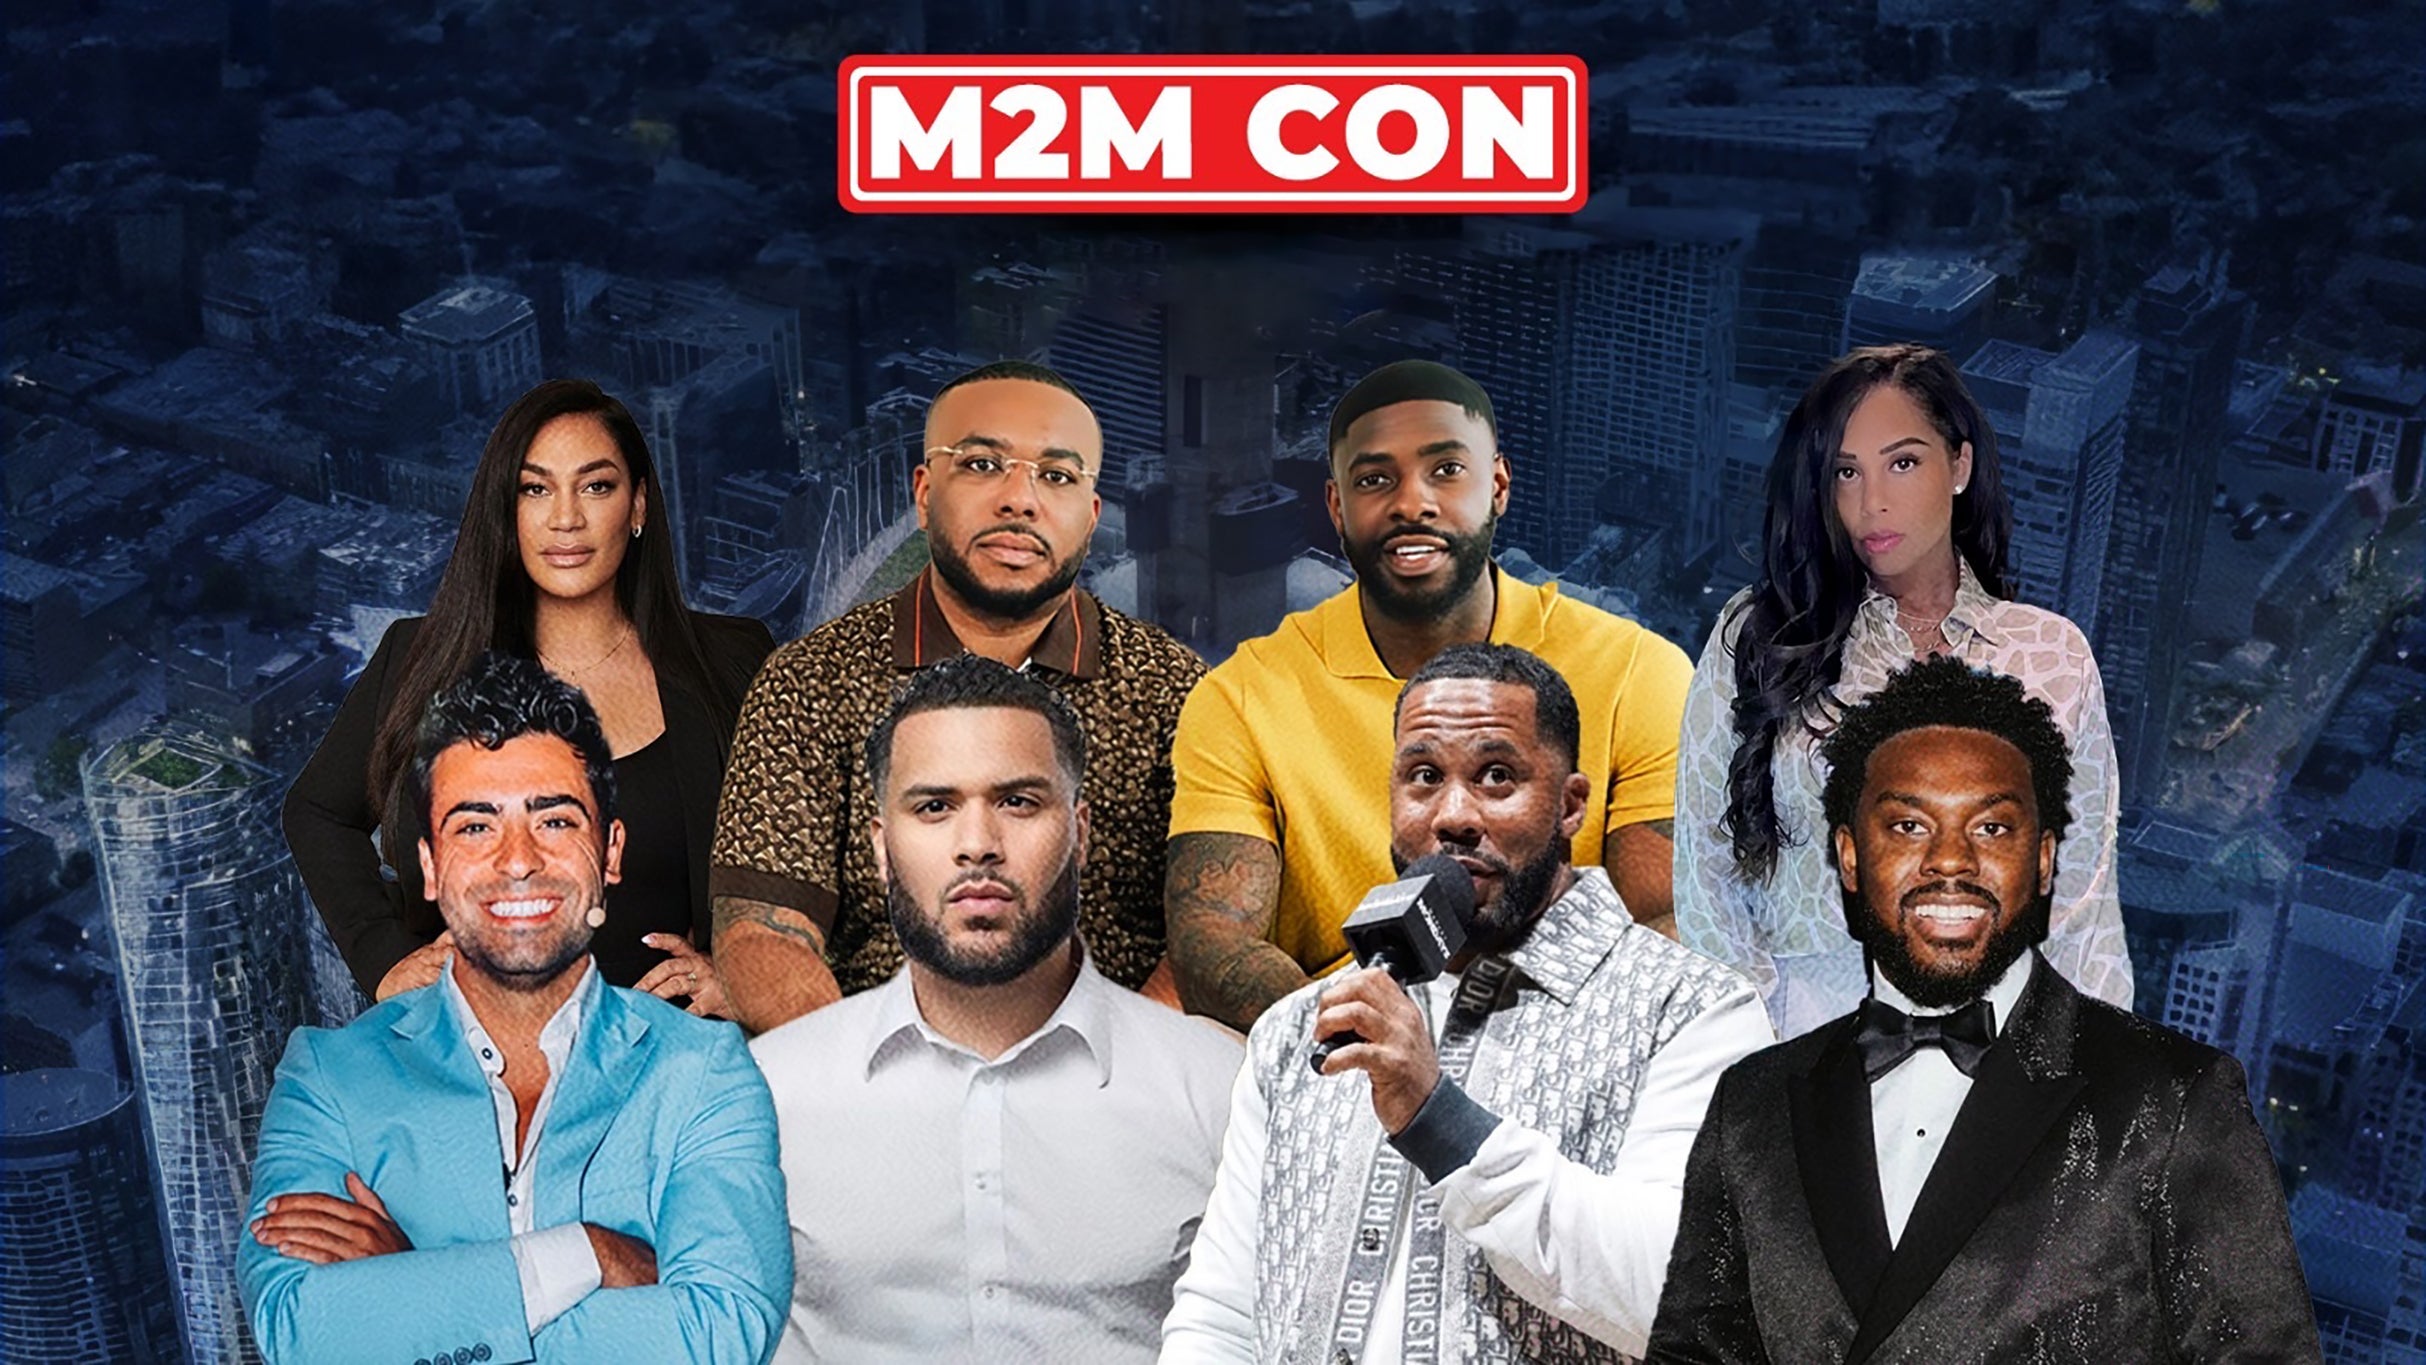 M2M CON in Toronto promo photo for Early Bird Sales presale offer code